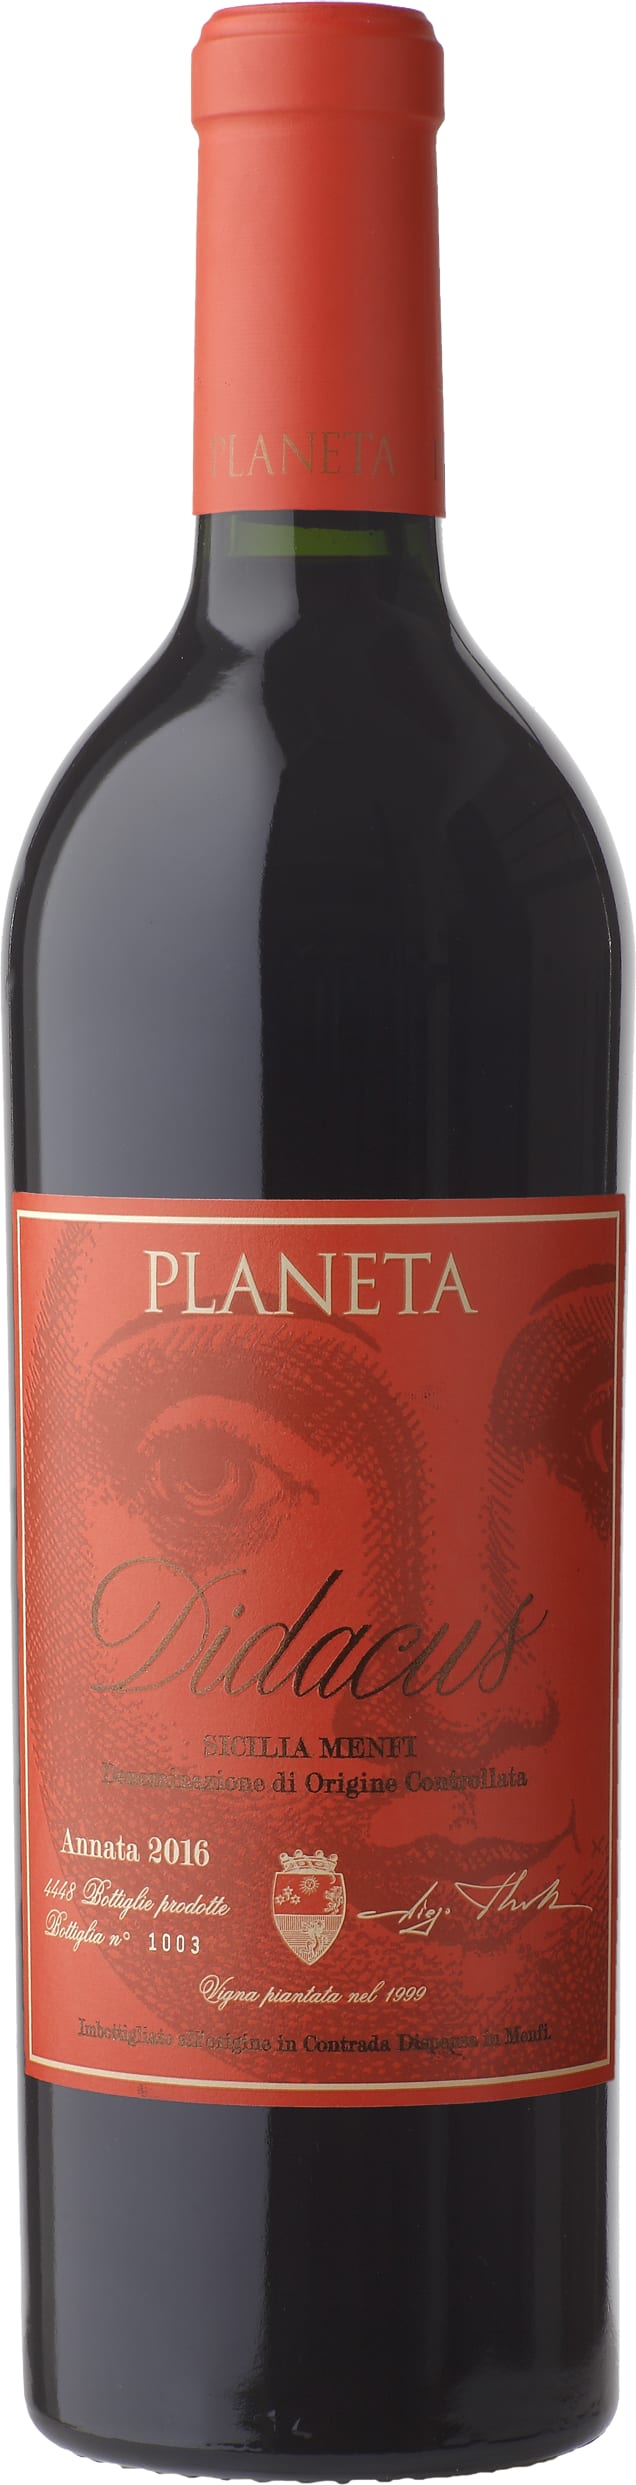 Planeta Didacus Cabernet Franc 2018 75cl - Buy Planeta Wines from GREAT WINES DIRECT wine shop